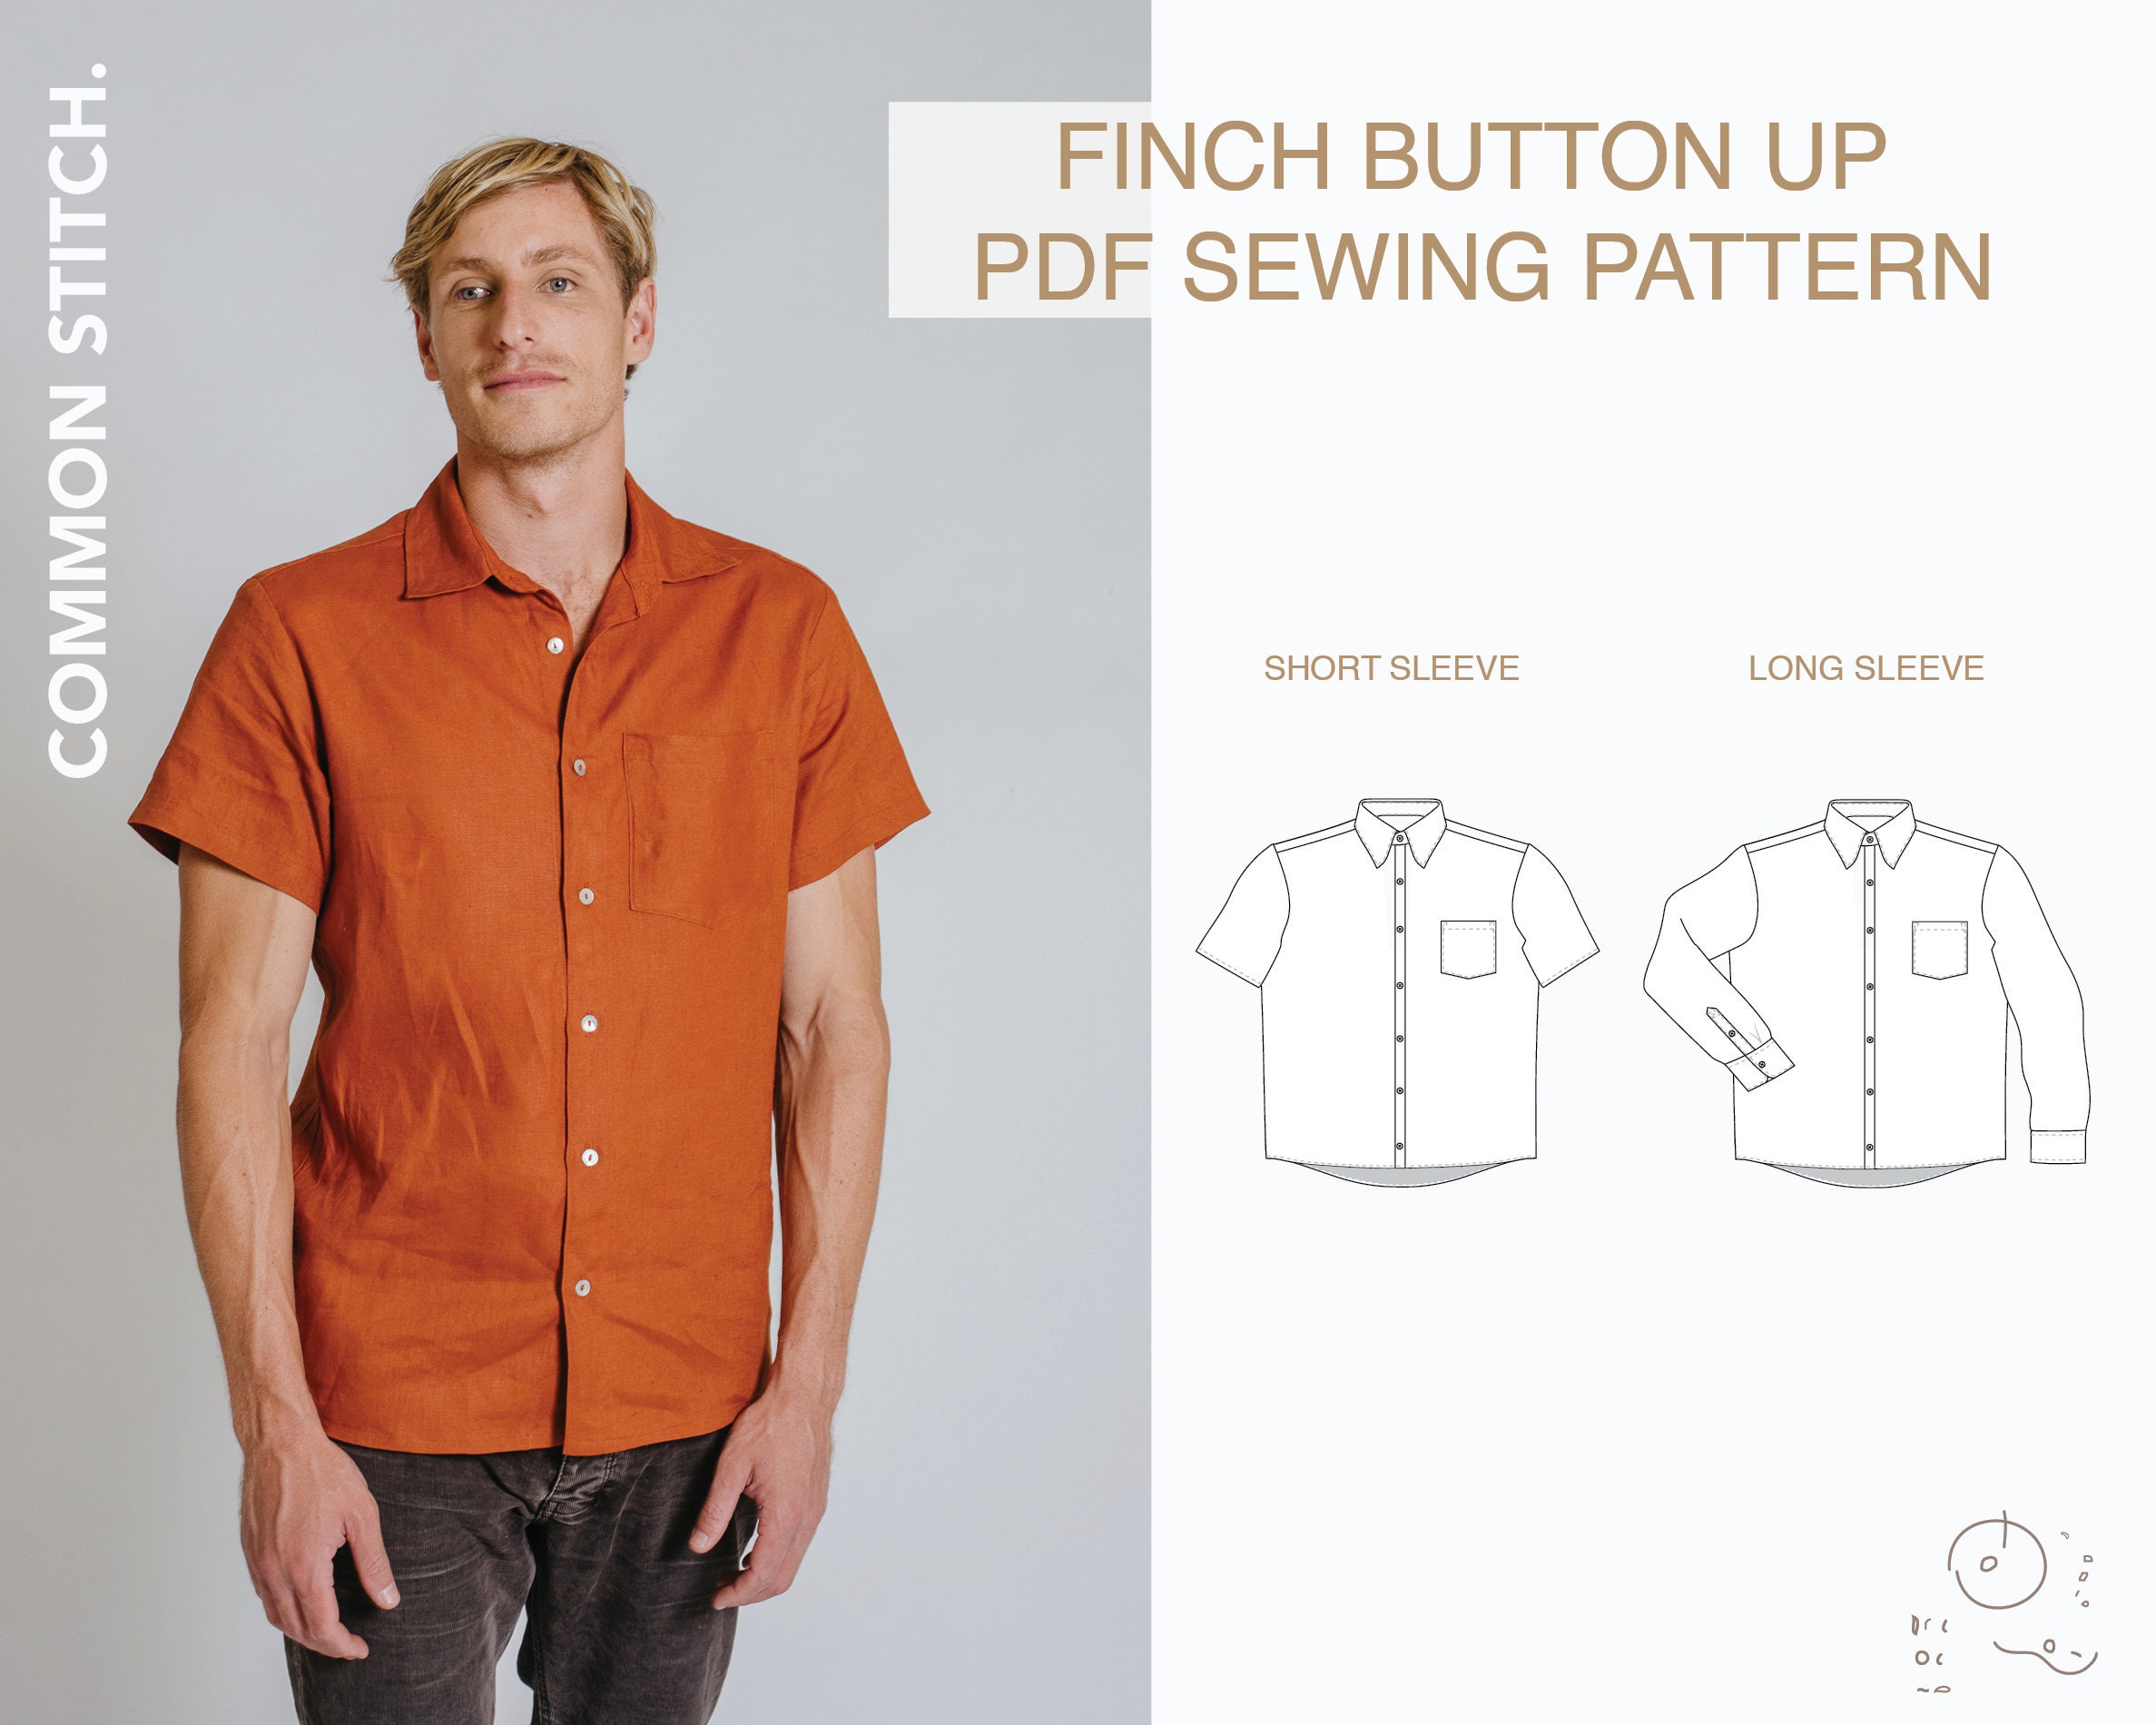 Finch Button up Digital Sewing Pattern 